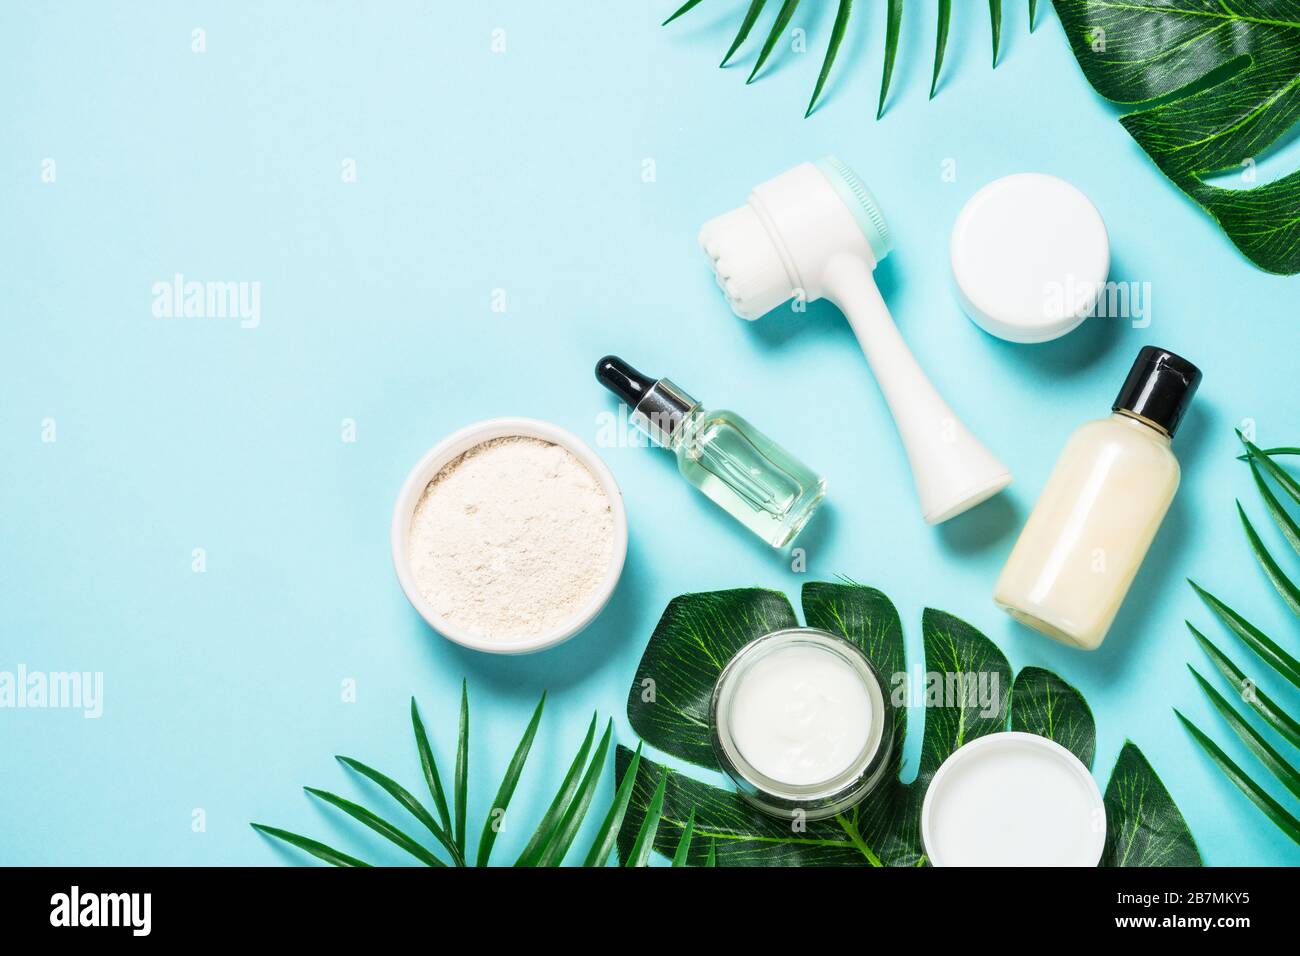 Skin care product on blue background. Stock Photo